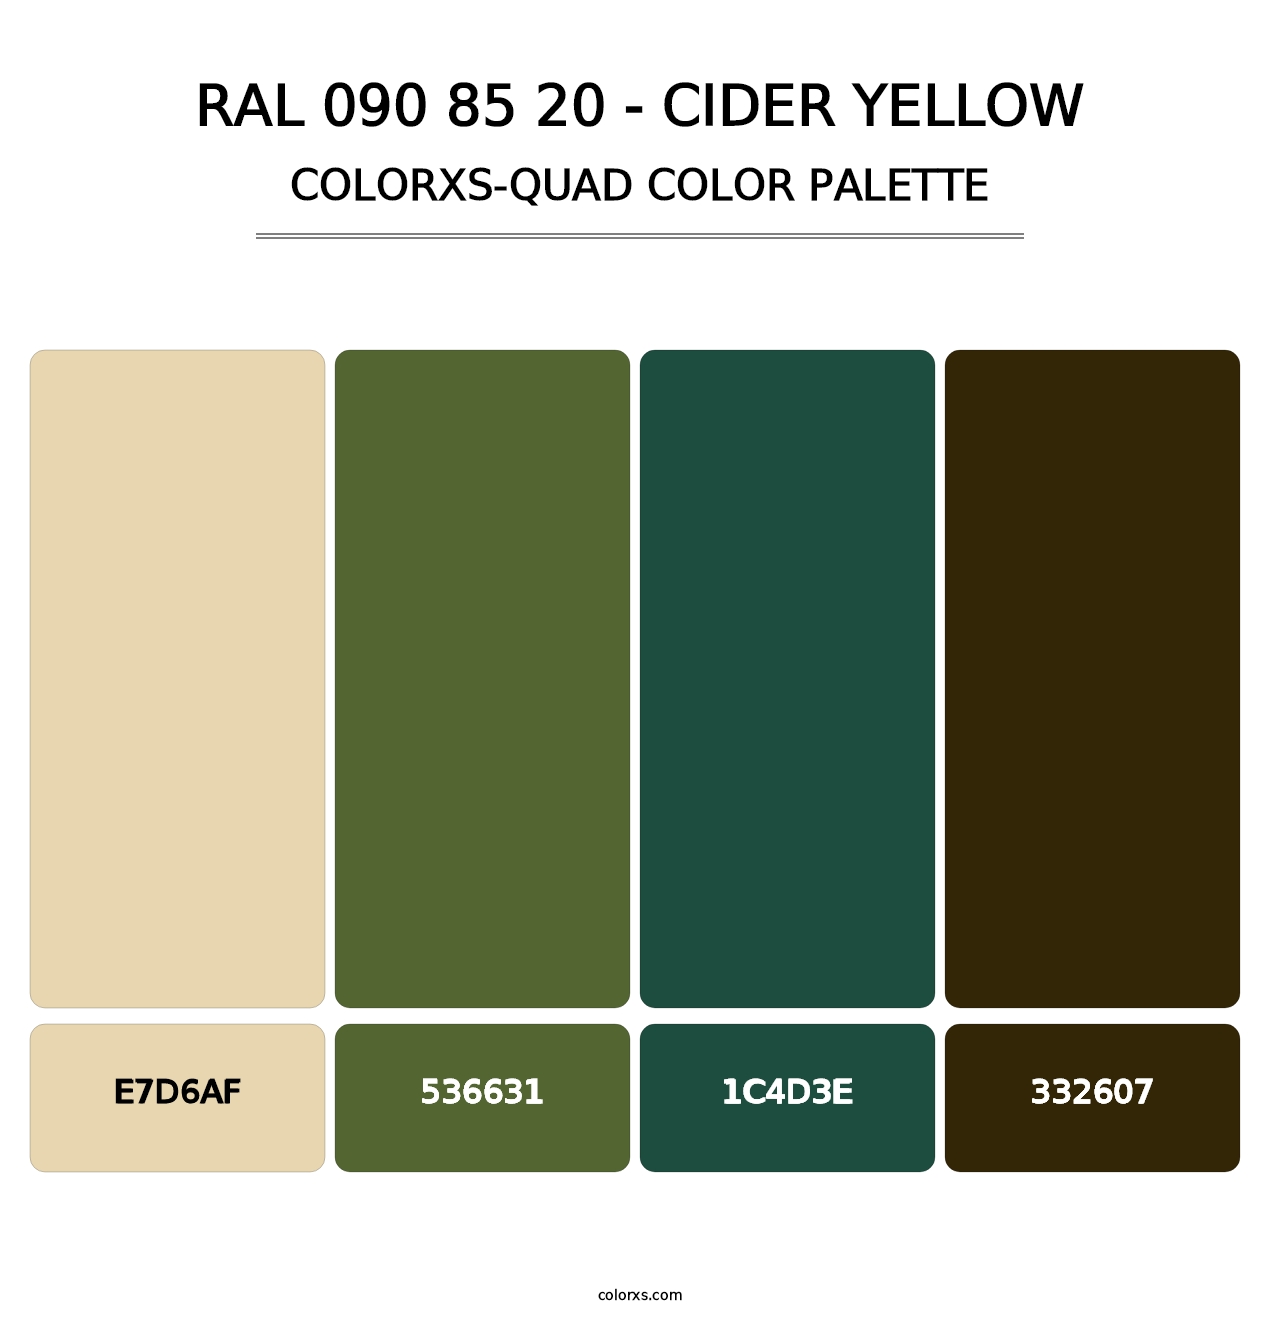 RAL 090 85 20 - Cider Yellow - Colorxs Quad Palette